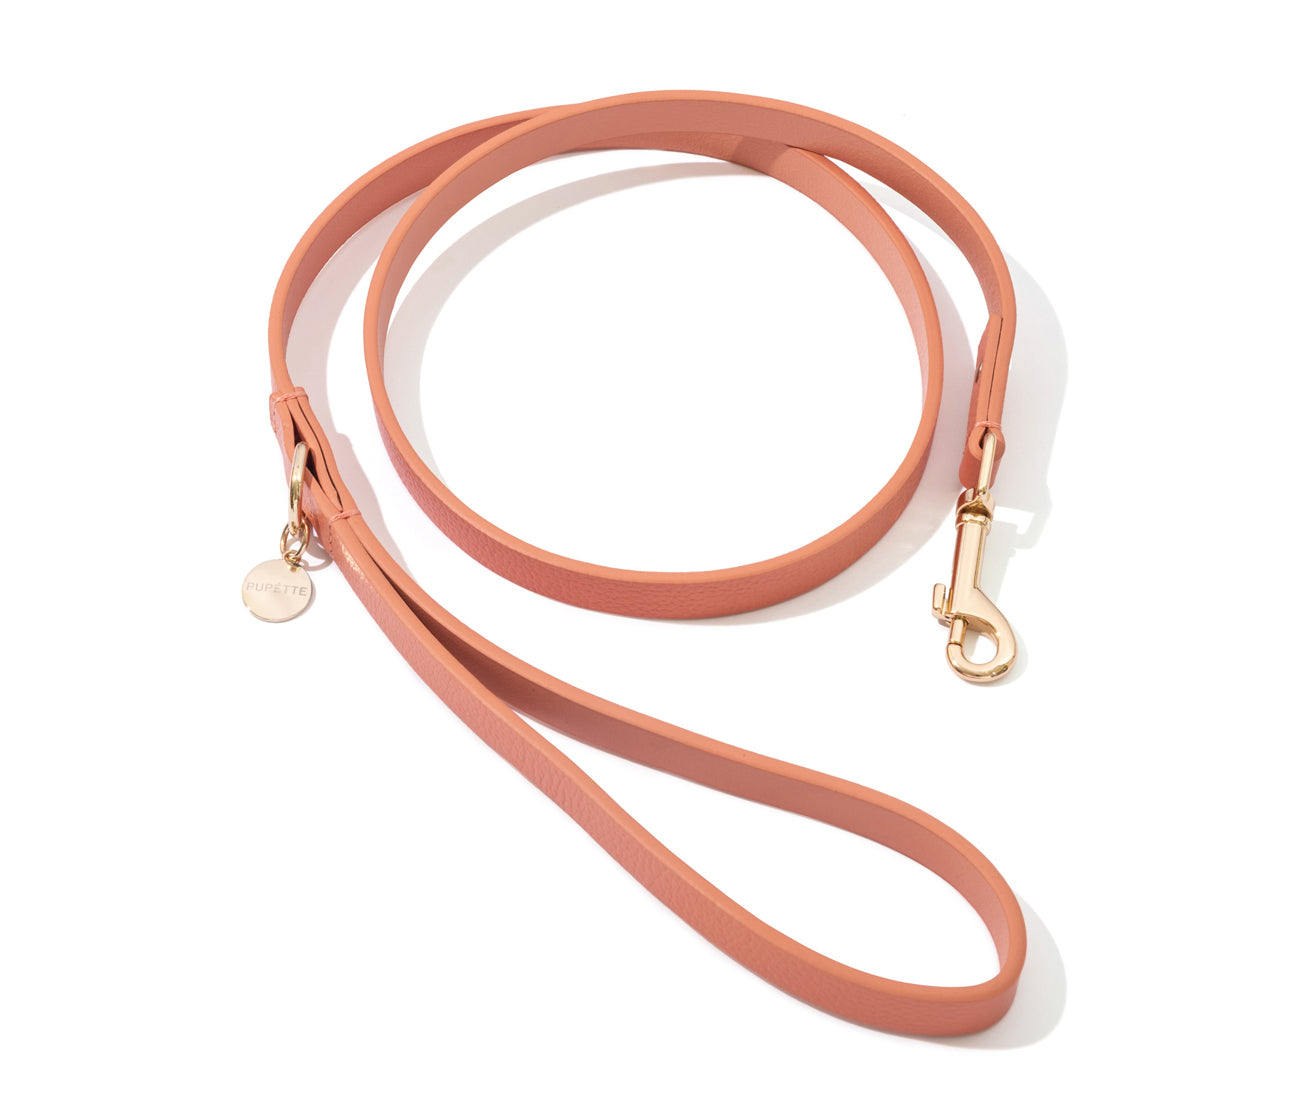 Luxe Leather Dog Lead - Peach